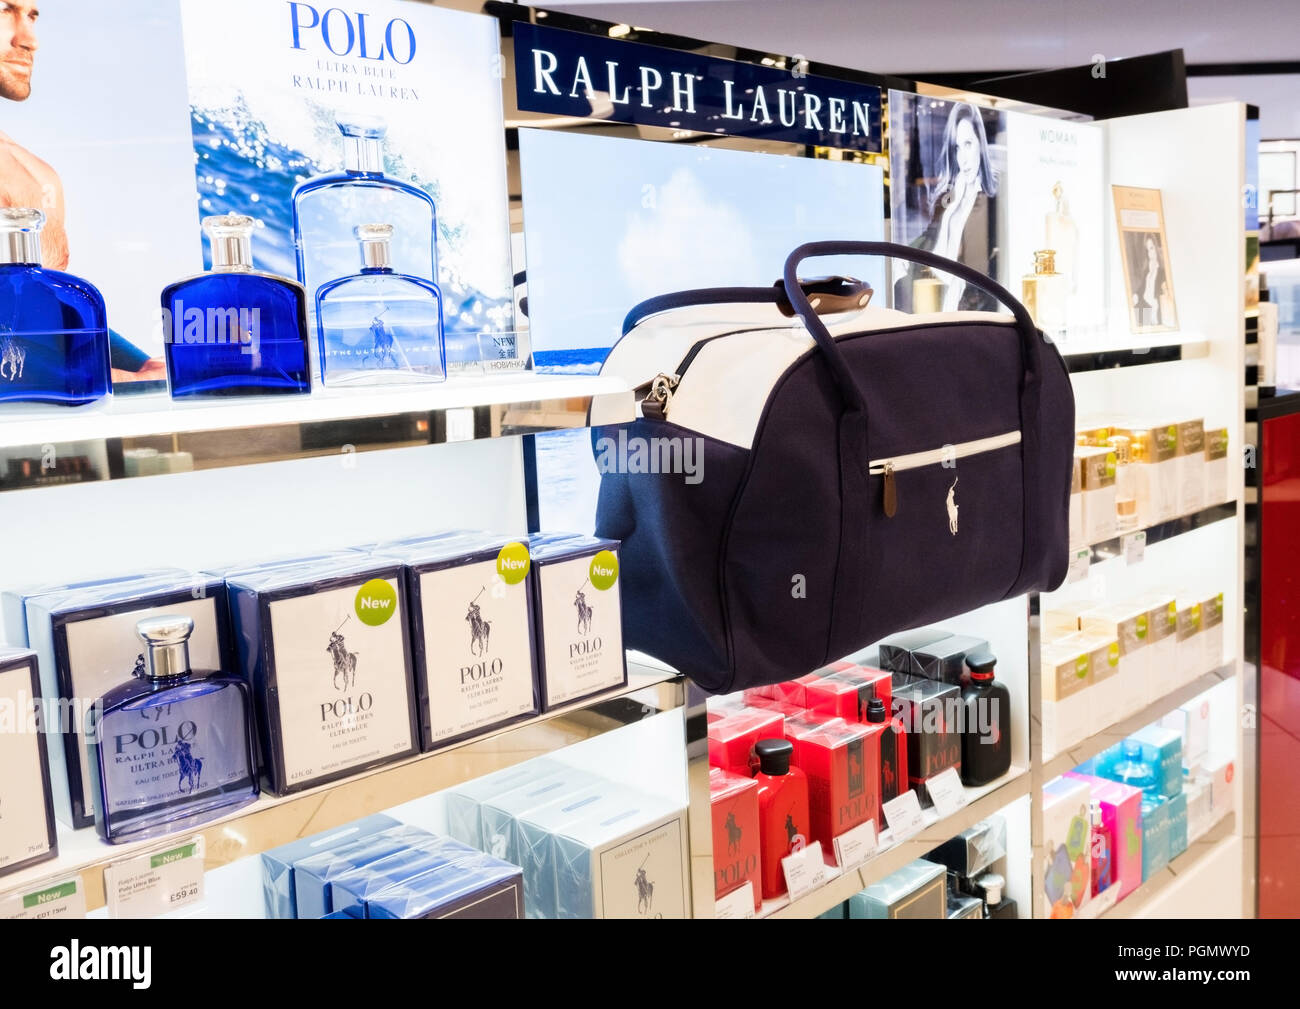 Ralph lauren perfume hi-res stock photography and images - Alamy